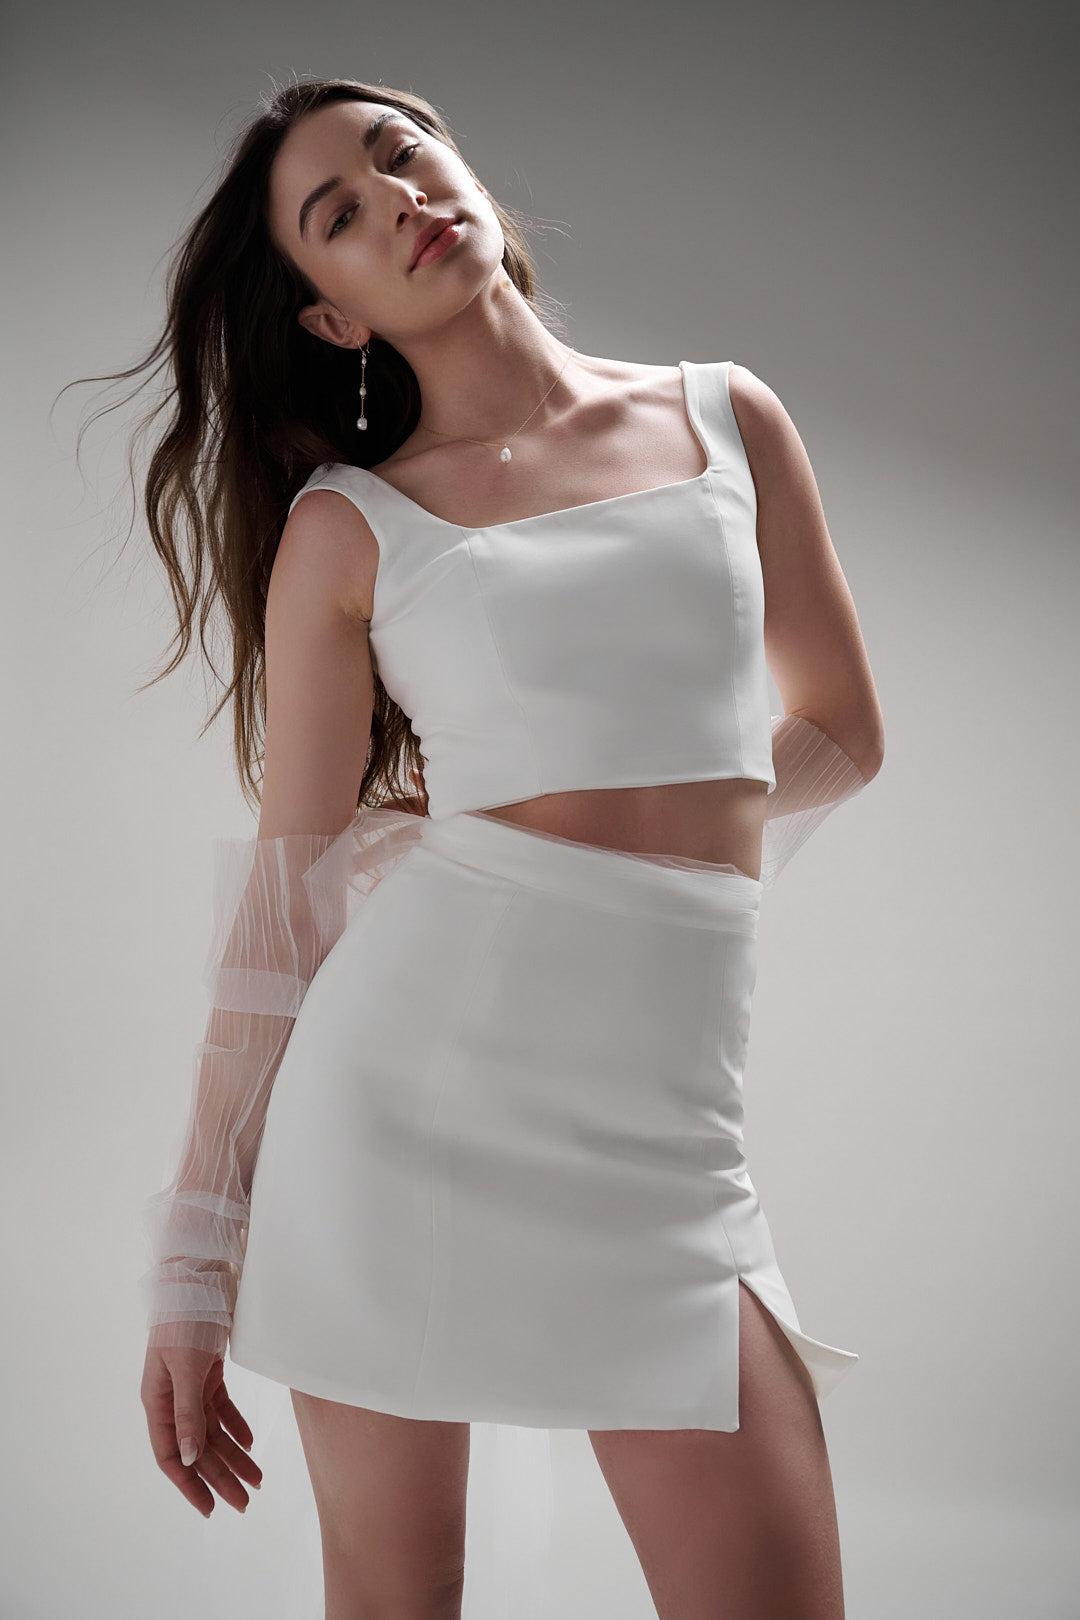 The perfect mini skirt for the bold and modern bride who loves to make a statement. This rebellious piece is designed to turn heads and is a must-have for those who aren't afraid to break bridal fashion traditions.